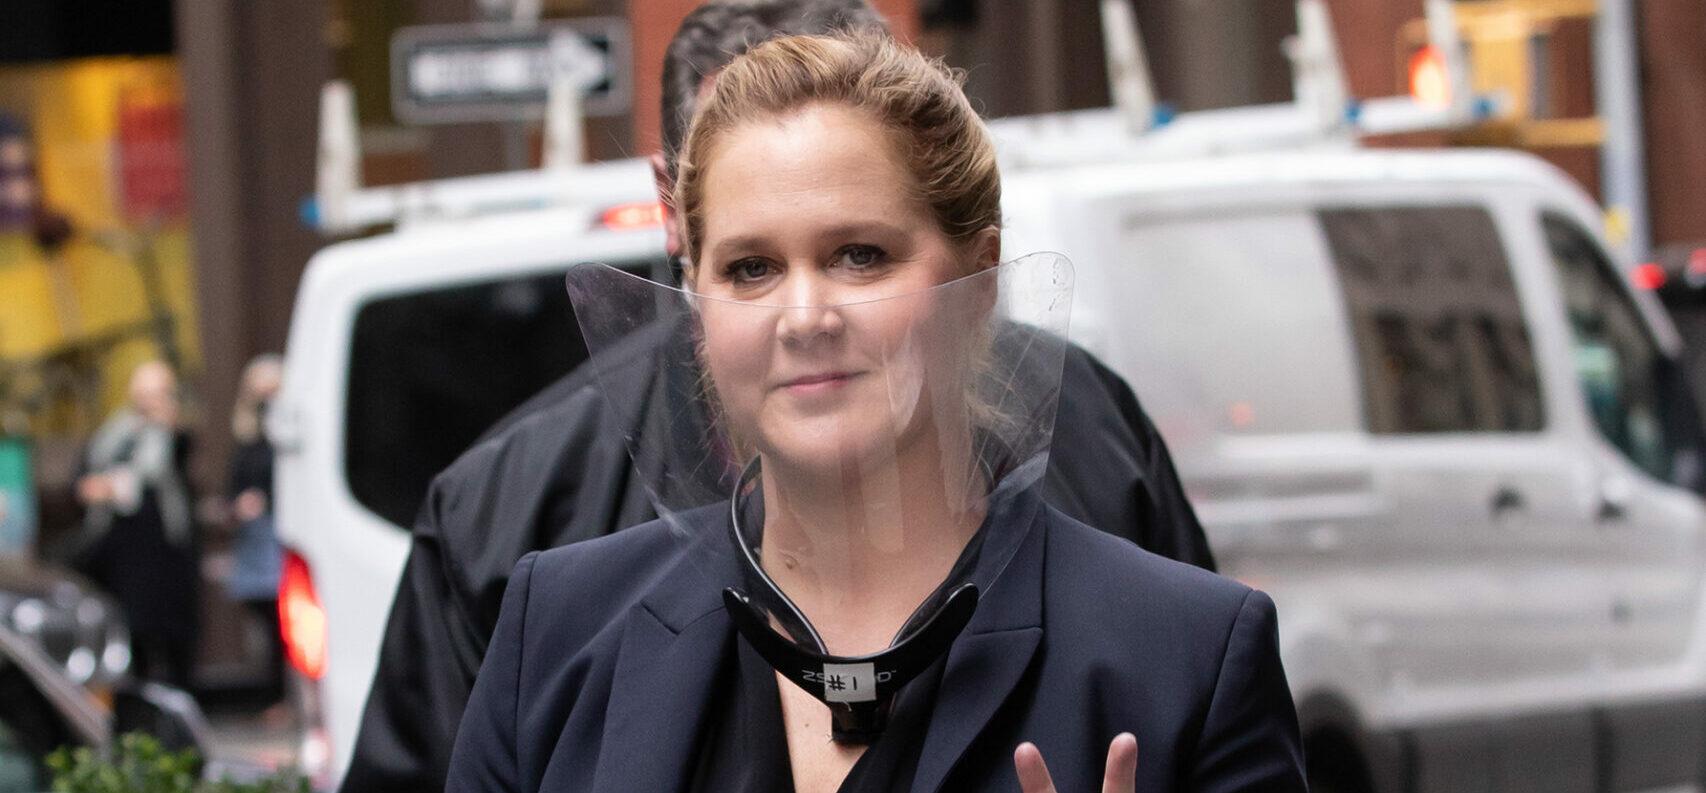 Amy Schumer Shows Off NEW Bathing Suit Body After Liposuction